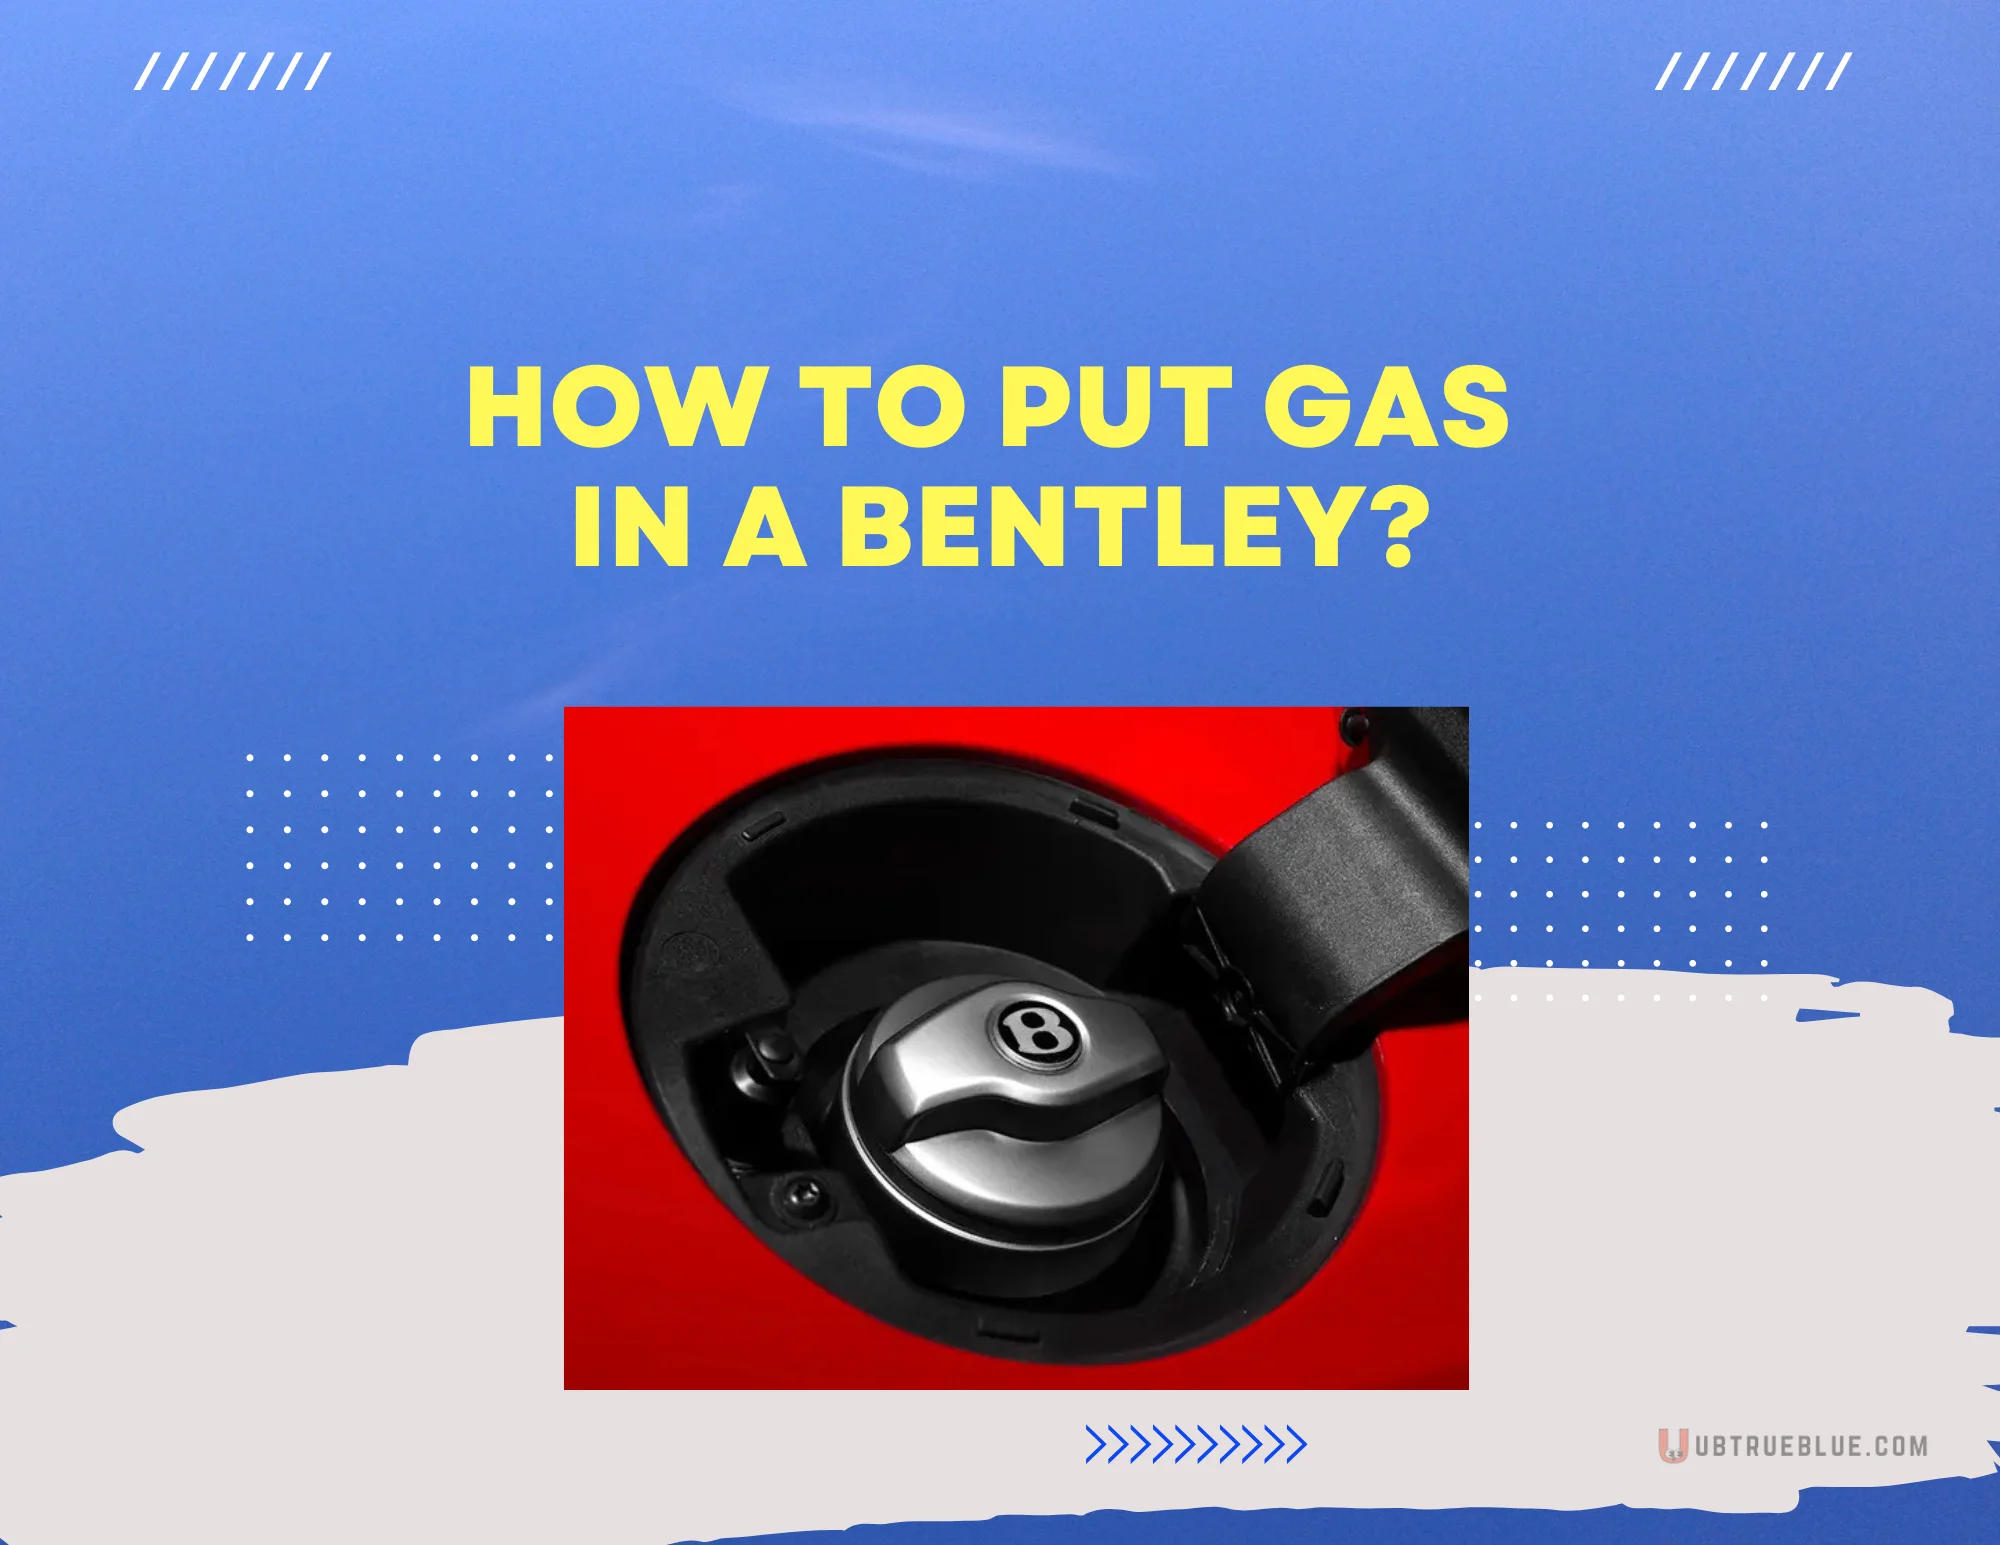 How To Put Gas In A Bentley Automotive The Ultimate Guide Tank Capacity Mpg Fuel Door Won't Open Continental Gt Cap  Full